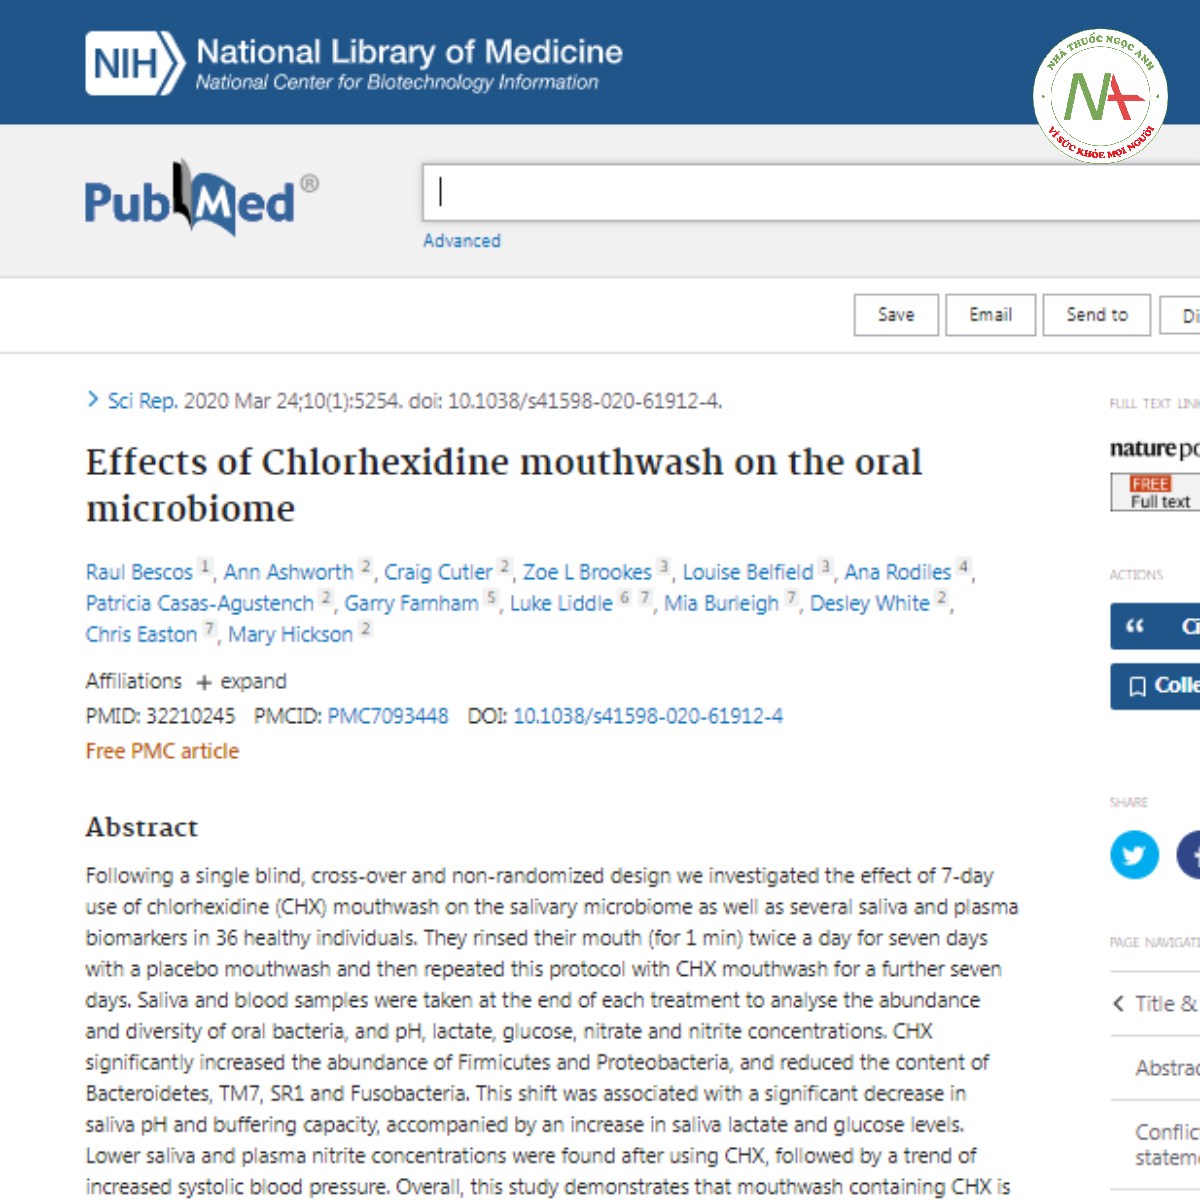 Effects of Chlorhexidine mouthwash on the oral microbiome